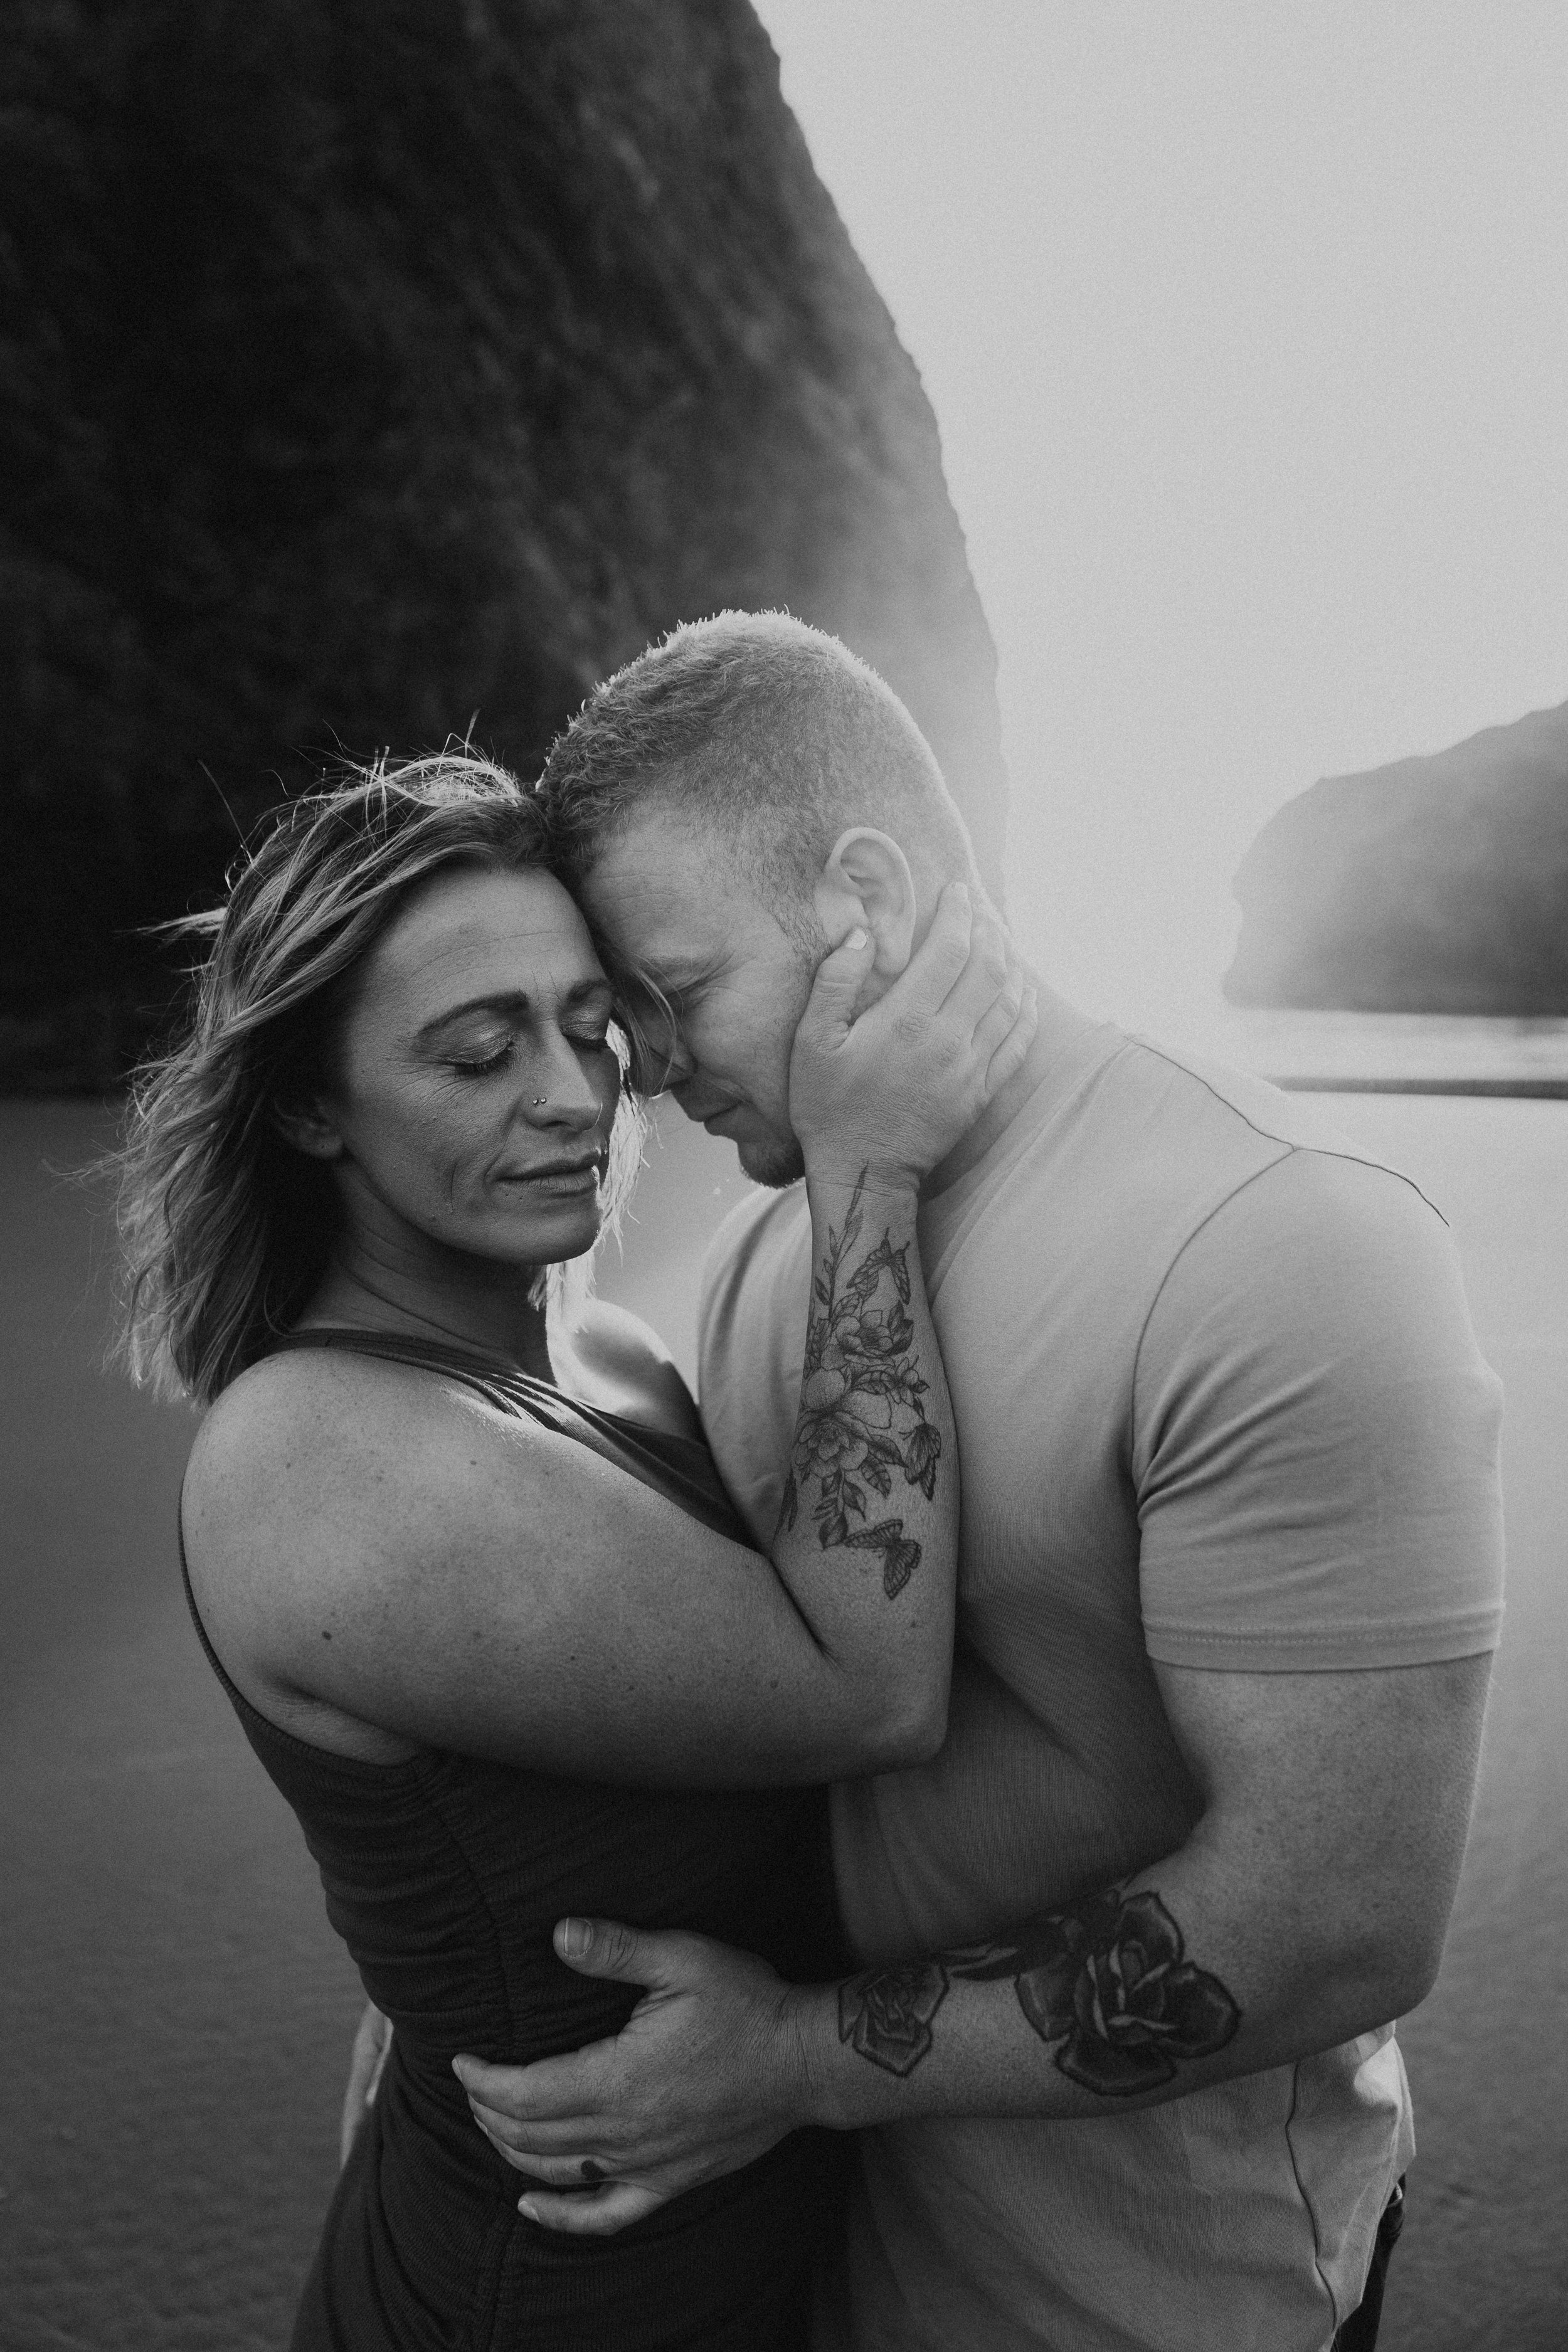  Oregon coast engagement session. Couples session in Southern Oregon. Couple playing on the beach with the sunset behind them at golden hour. Man and woman cuddle up together as the sun sets behind them between the huge rocks on the beach. Black and 